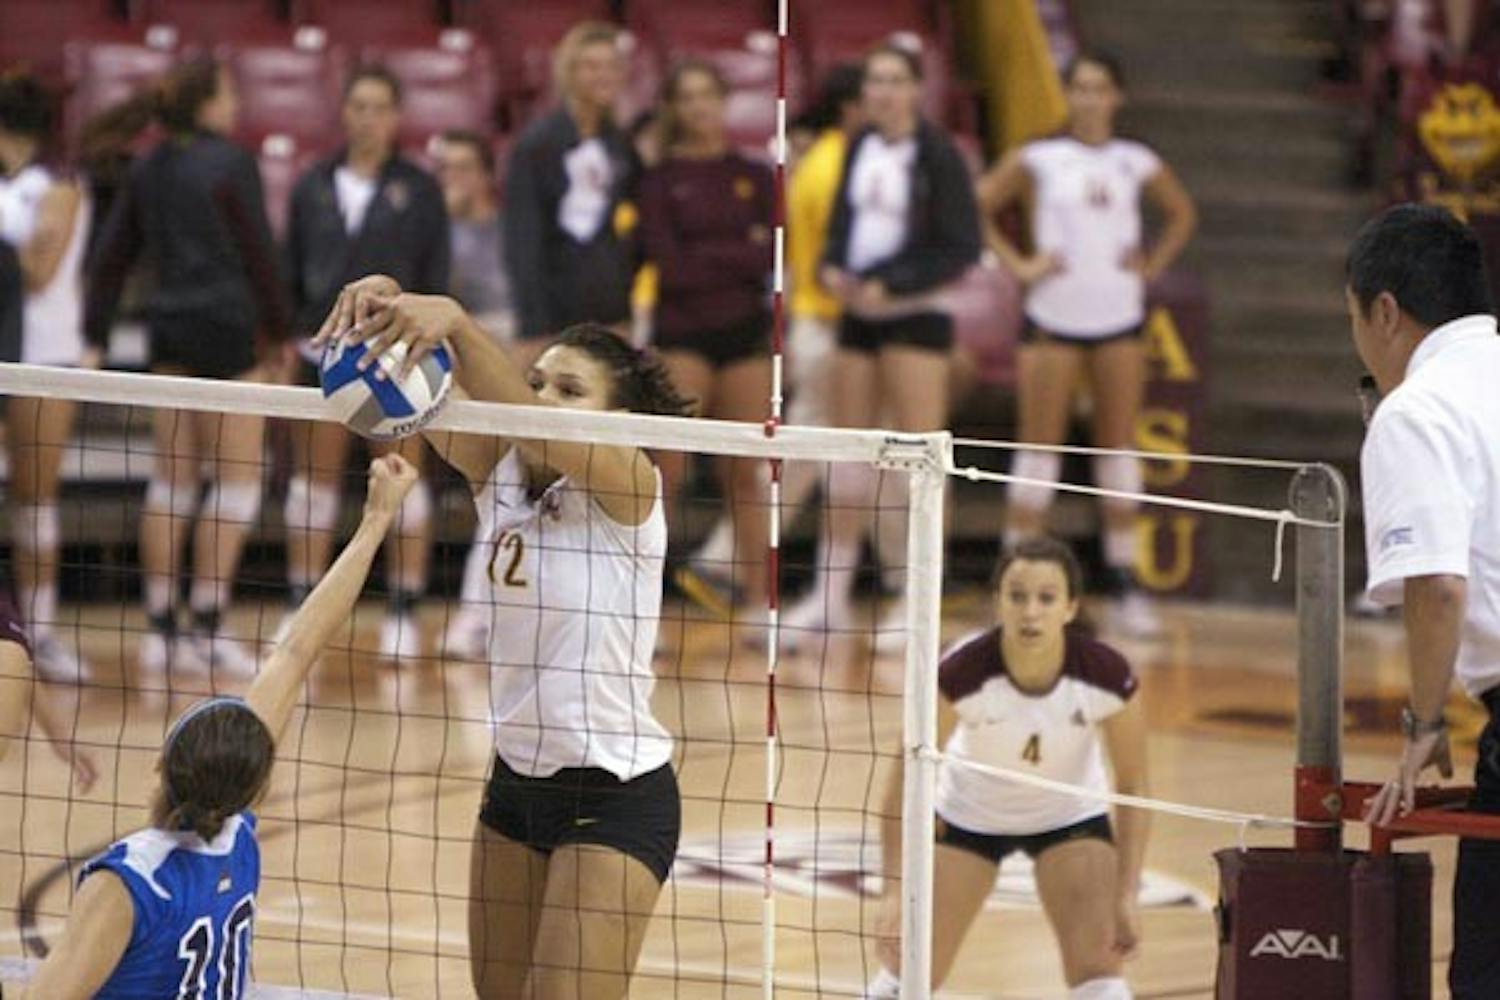 UP AND OVER: Senior outside hitter Sarah Reaves executes a block during a home match last weekend. The ASU women's volleyball team was back on the road over the weekend and split the series, topping Washington State before losing to Washington. (Photo by Scott Stuk)